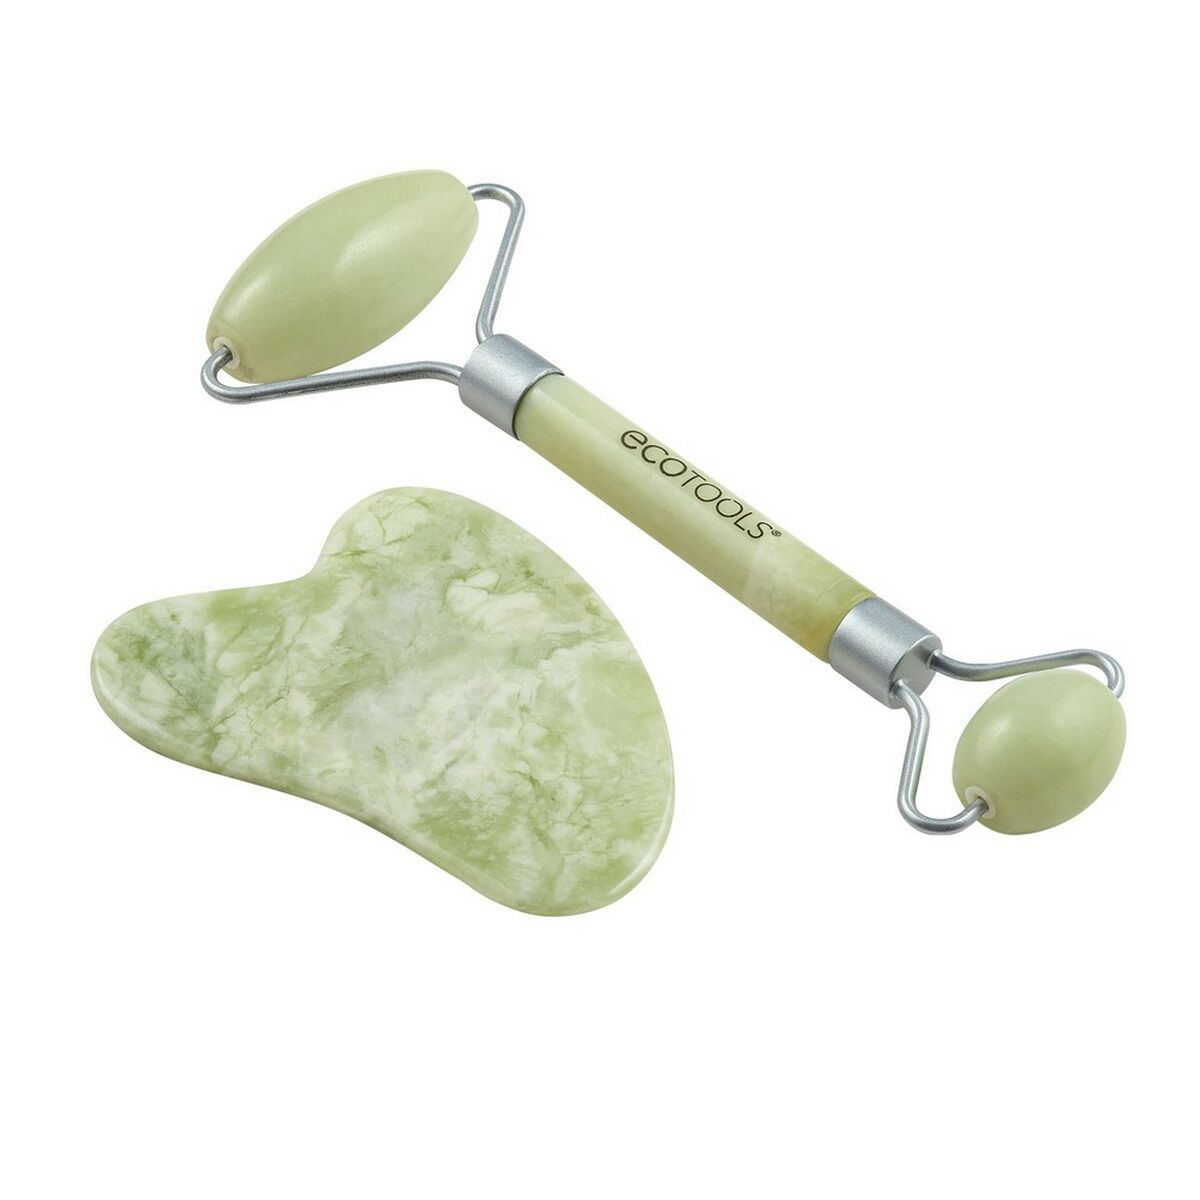 Anti-Ageing Treatment for Face and Neck Ecotools Jade Jade Set 2 Pieces